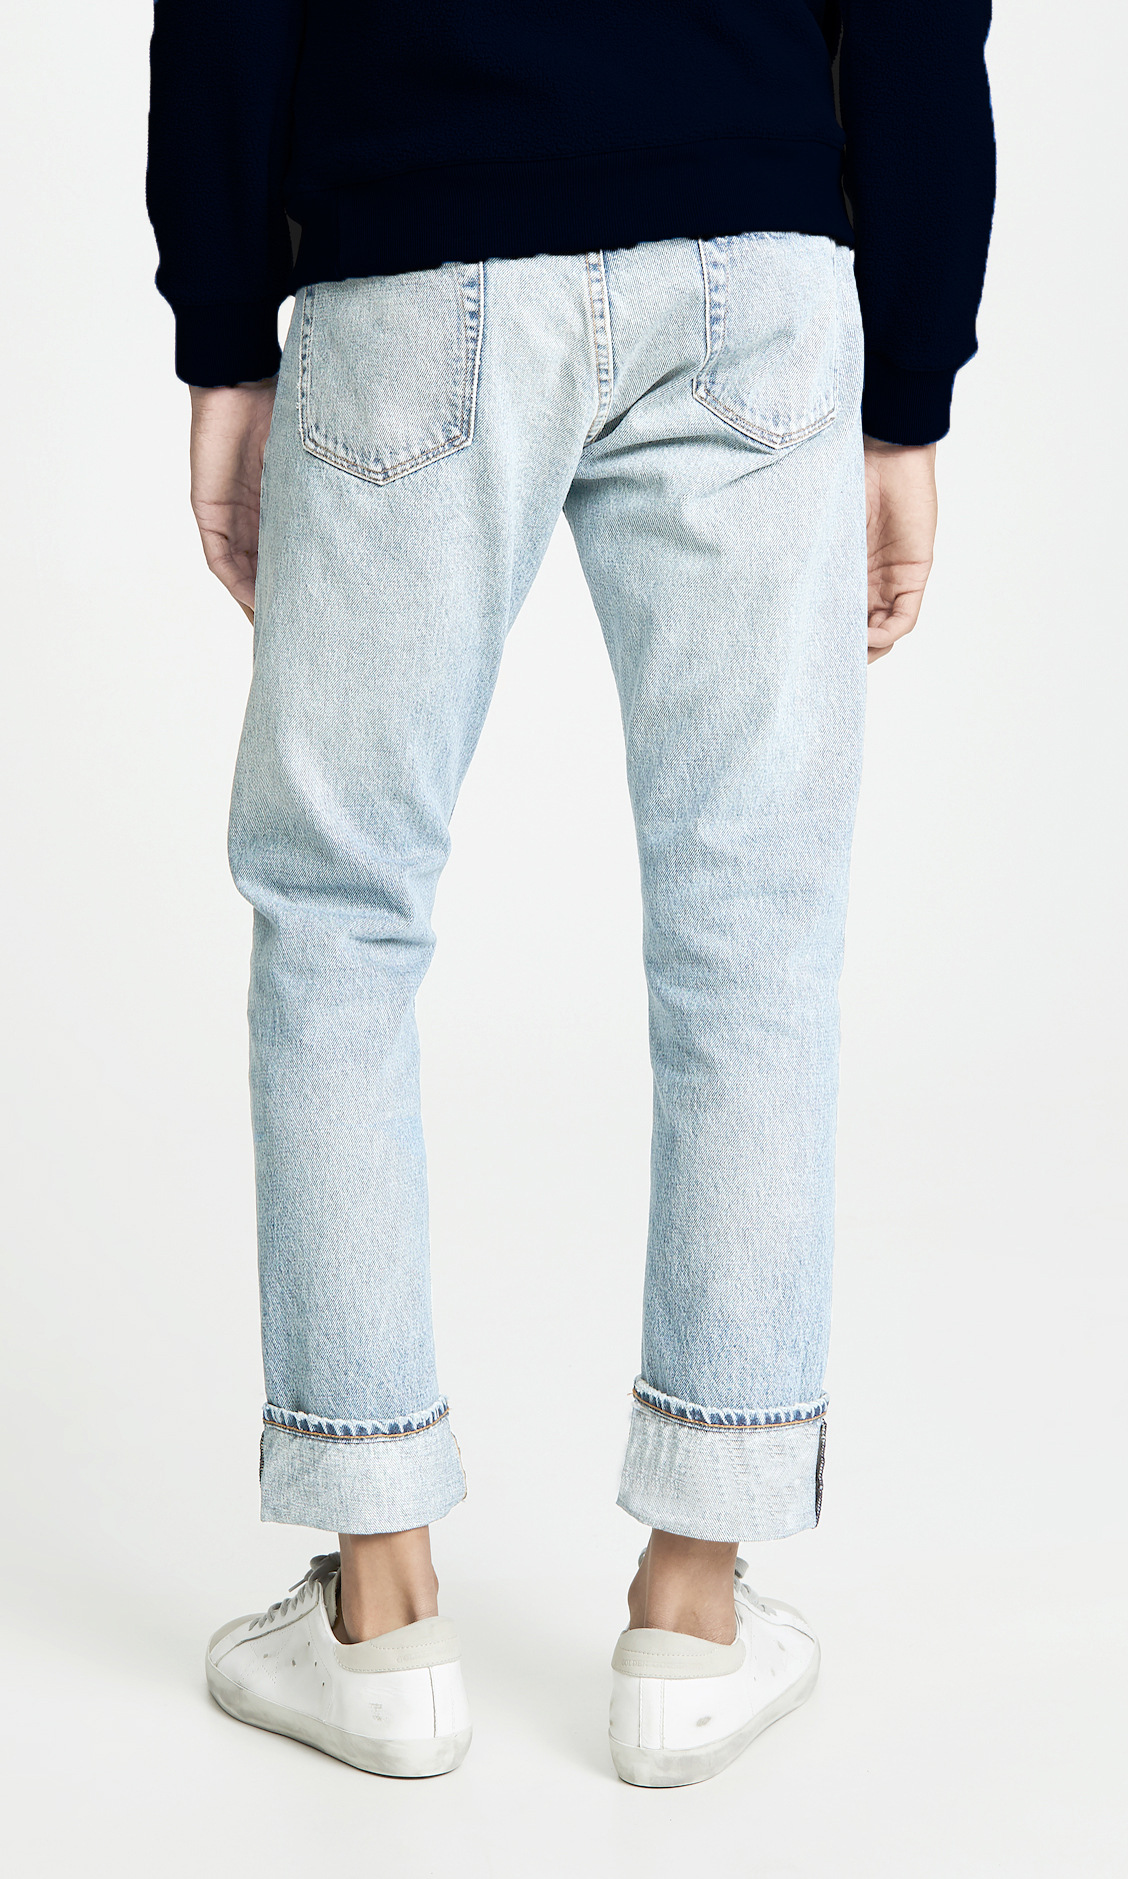 Ripped Slim Jeans For Men, Pencil Jeans, Tailored Fit, Fashionable, For Street Driving, Locomotive, Party Wear, Denim